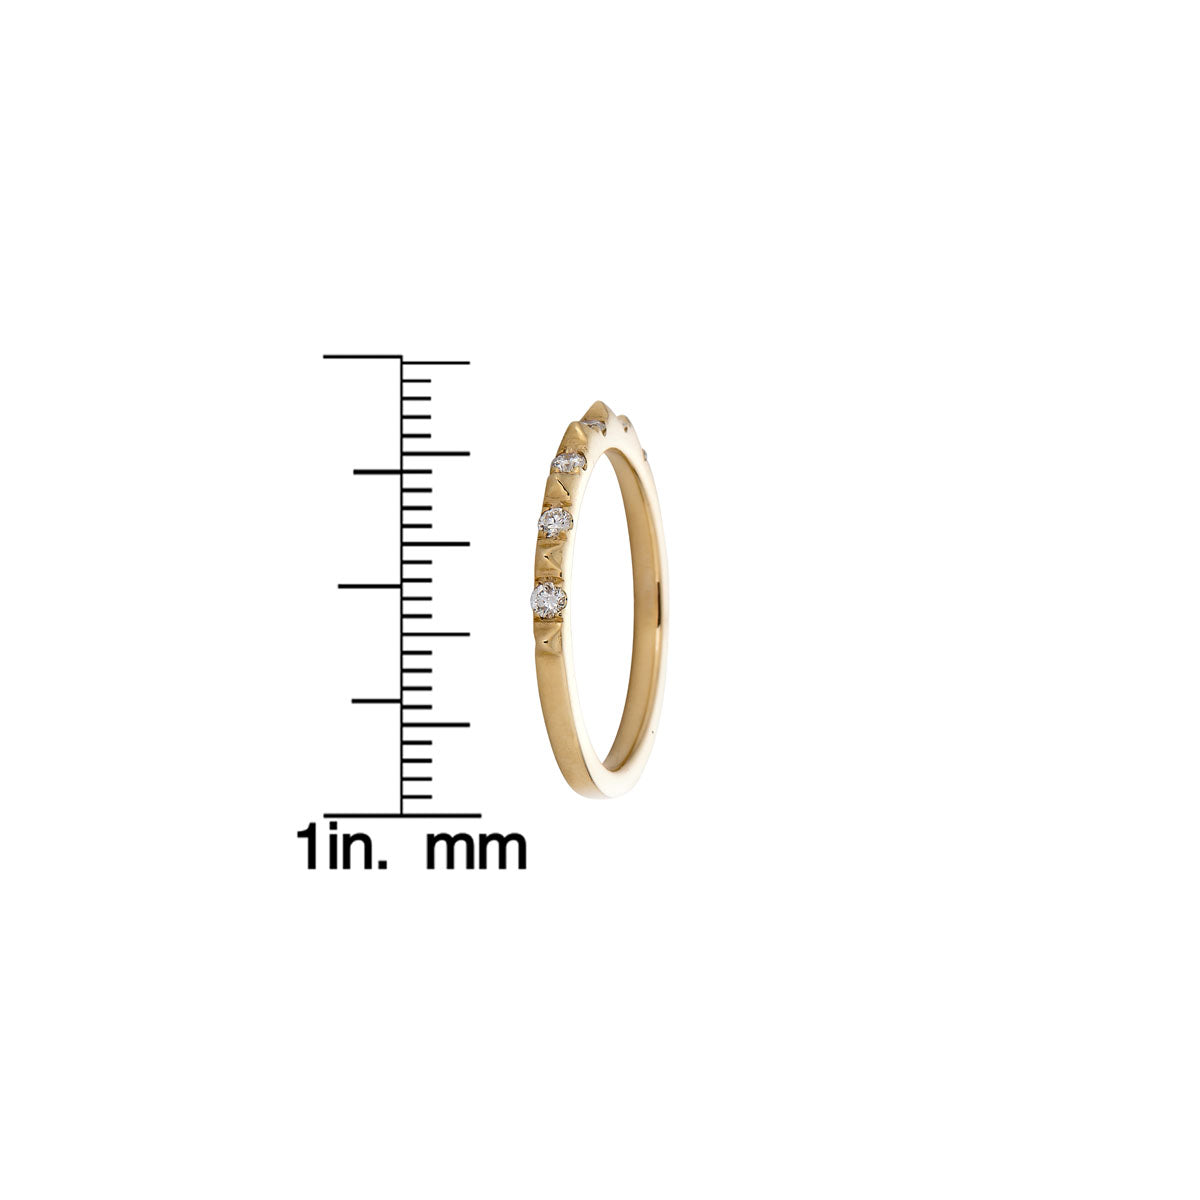 spikes diamond gold ring side view measurement